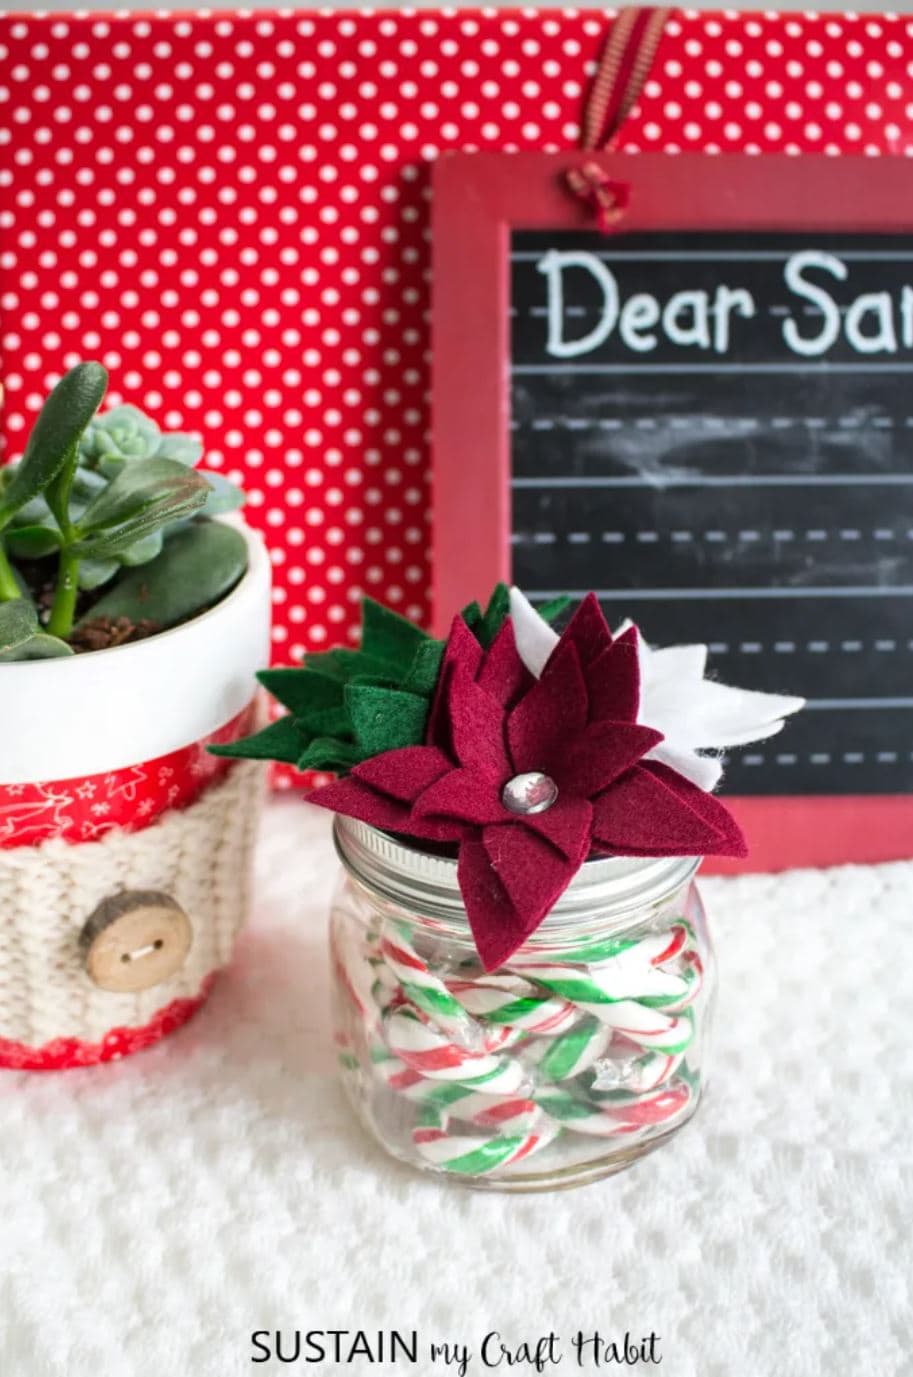 A glass jar topped with a handmade Christmas poinsettia.